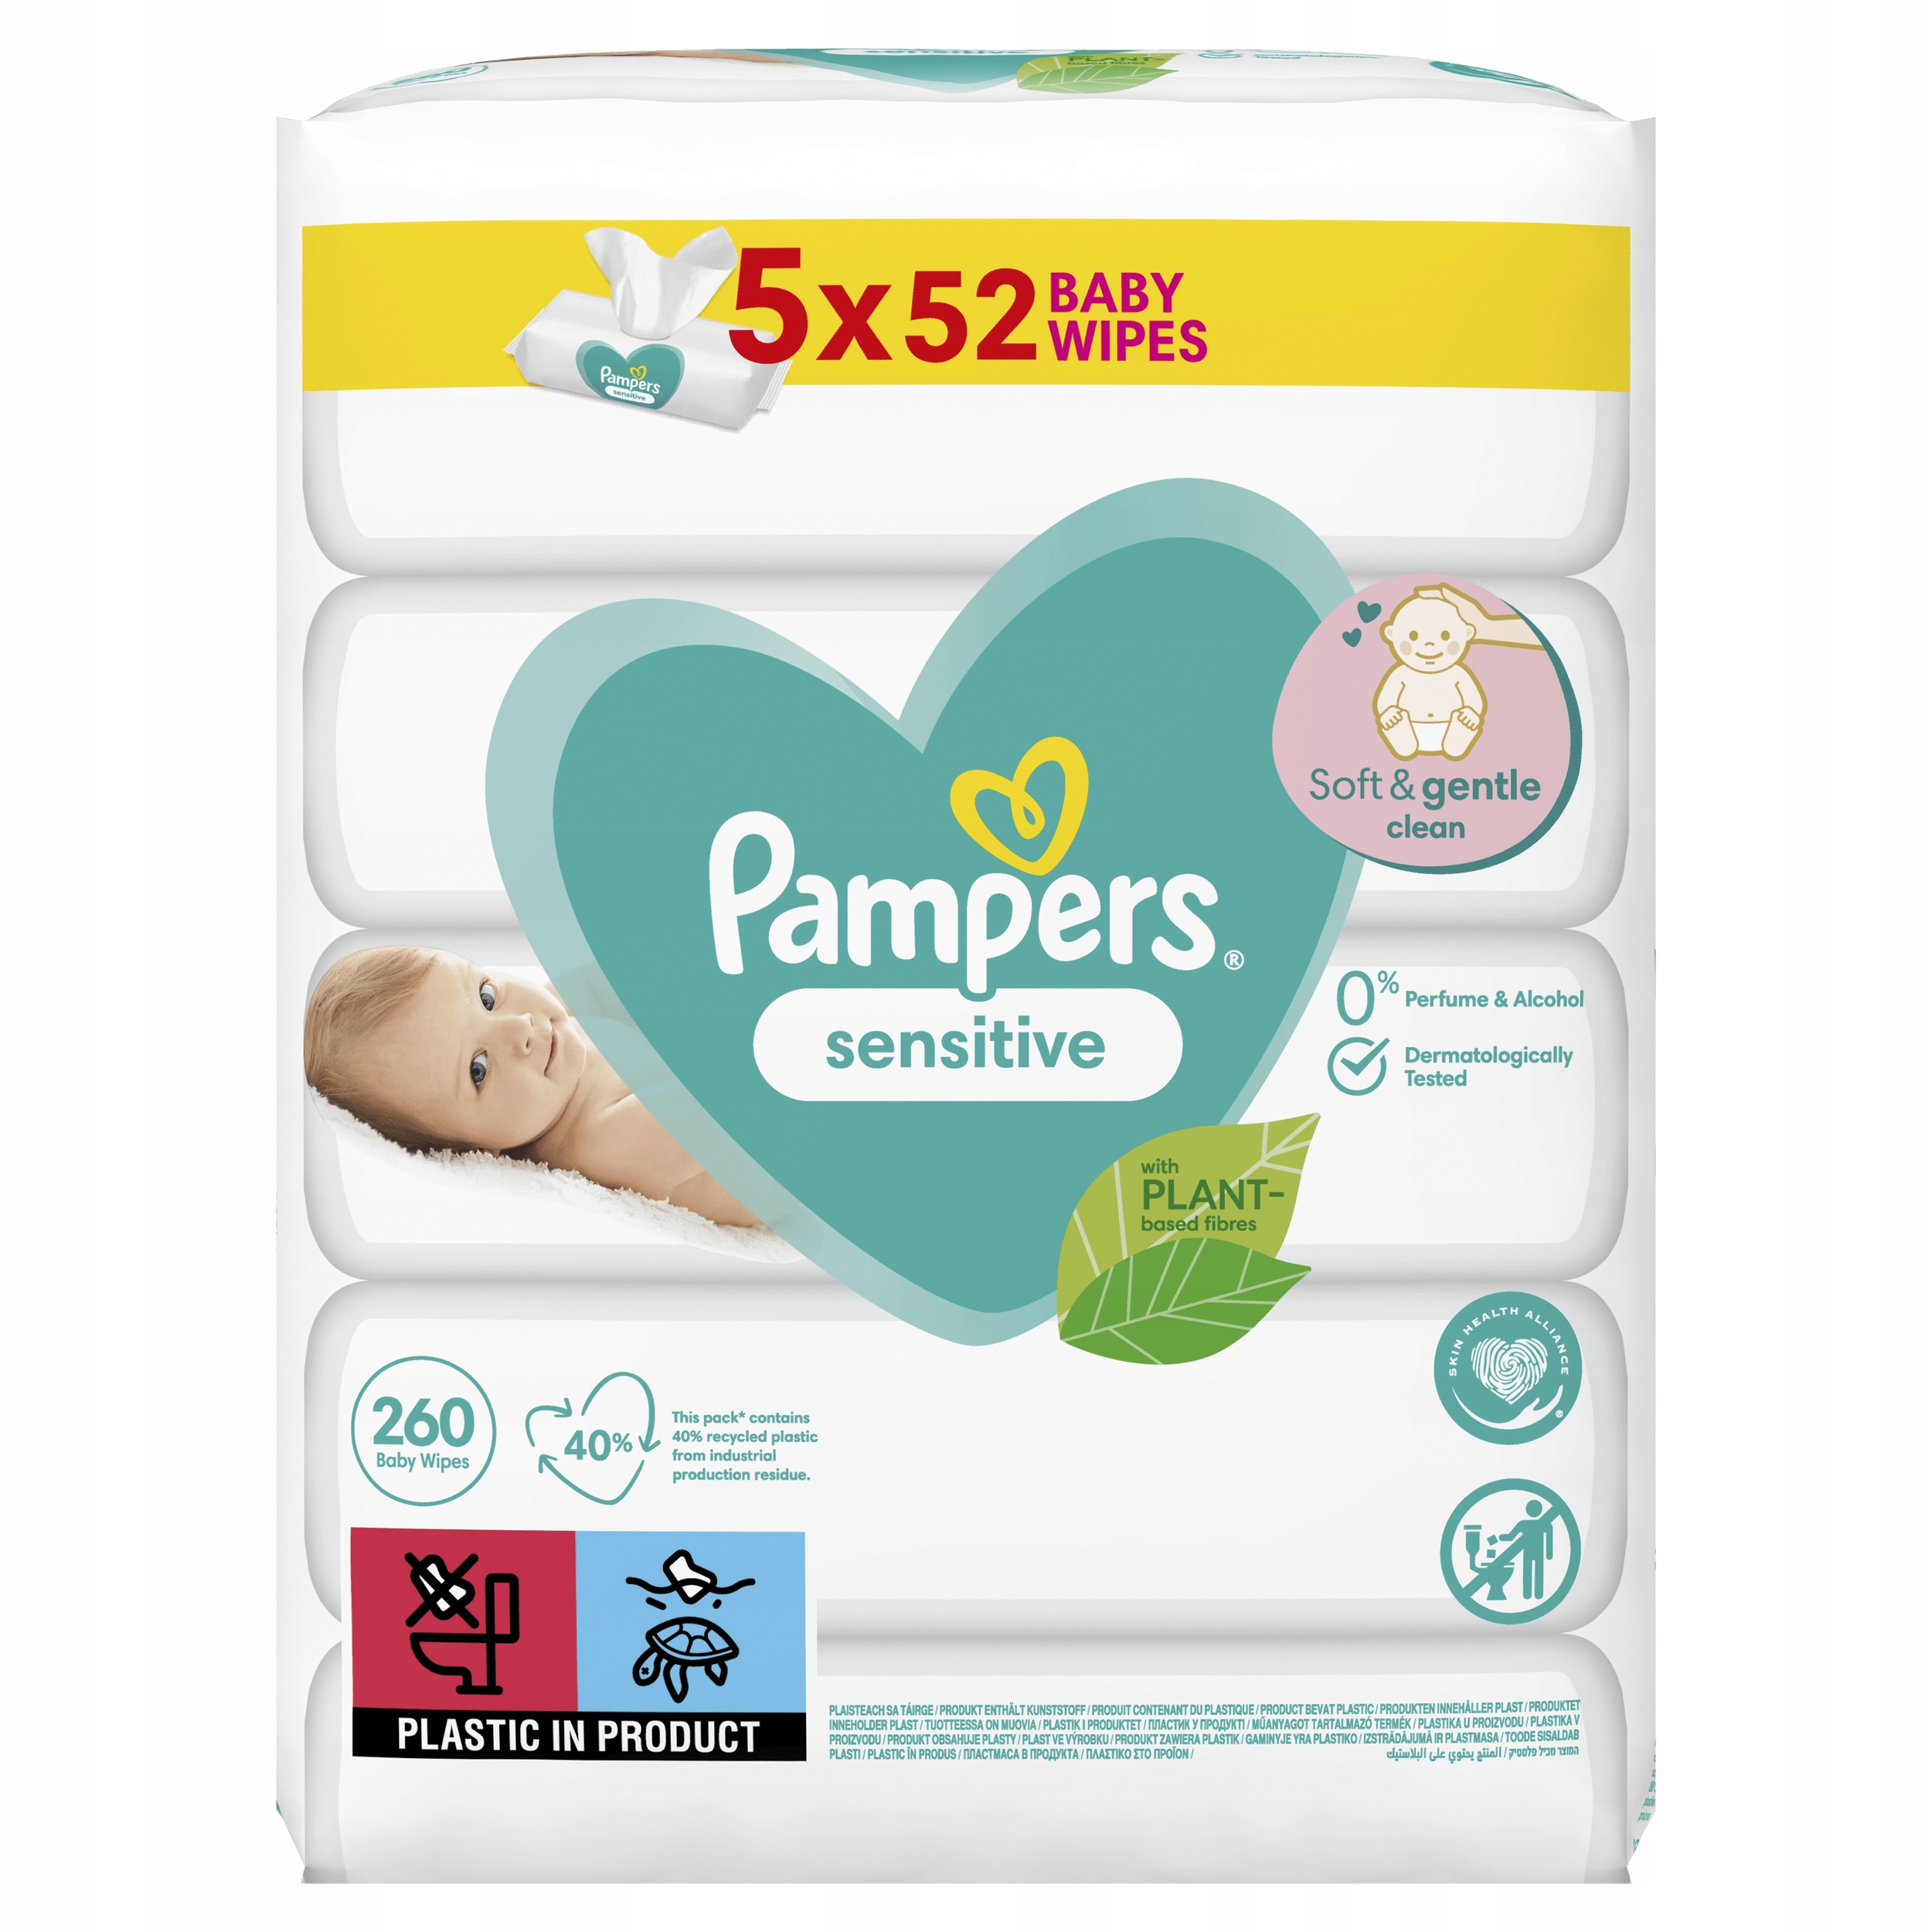 bella happy a pampers